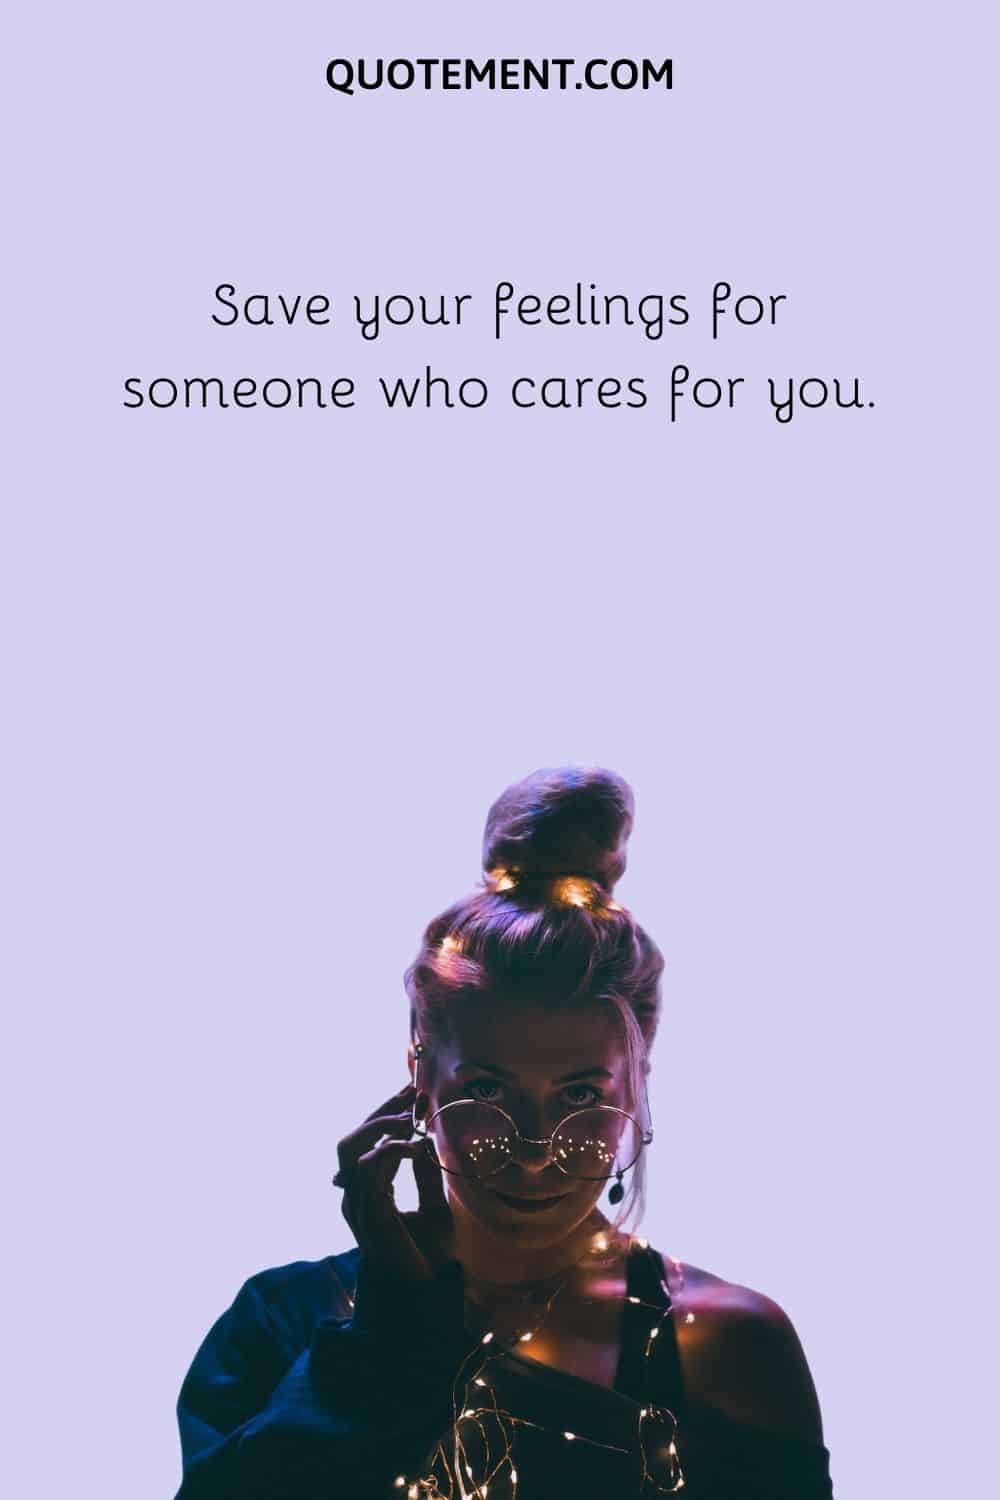 Save your feelings for someone who cares for you